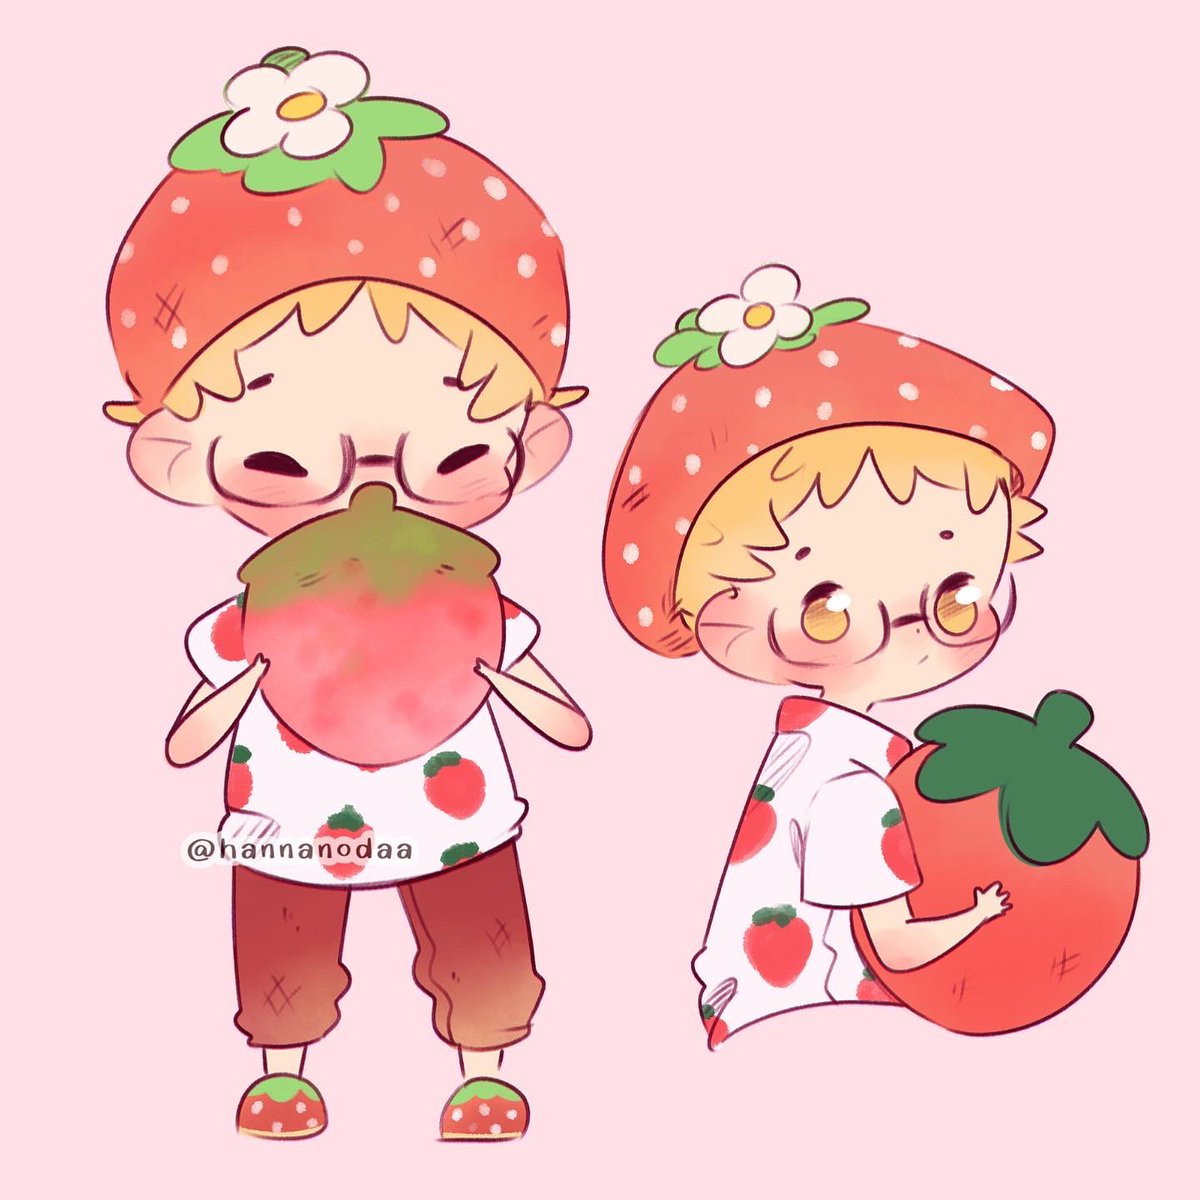 「Tsukki 🍓🍓 」|🌱 (commissions open)のイラスト